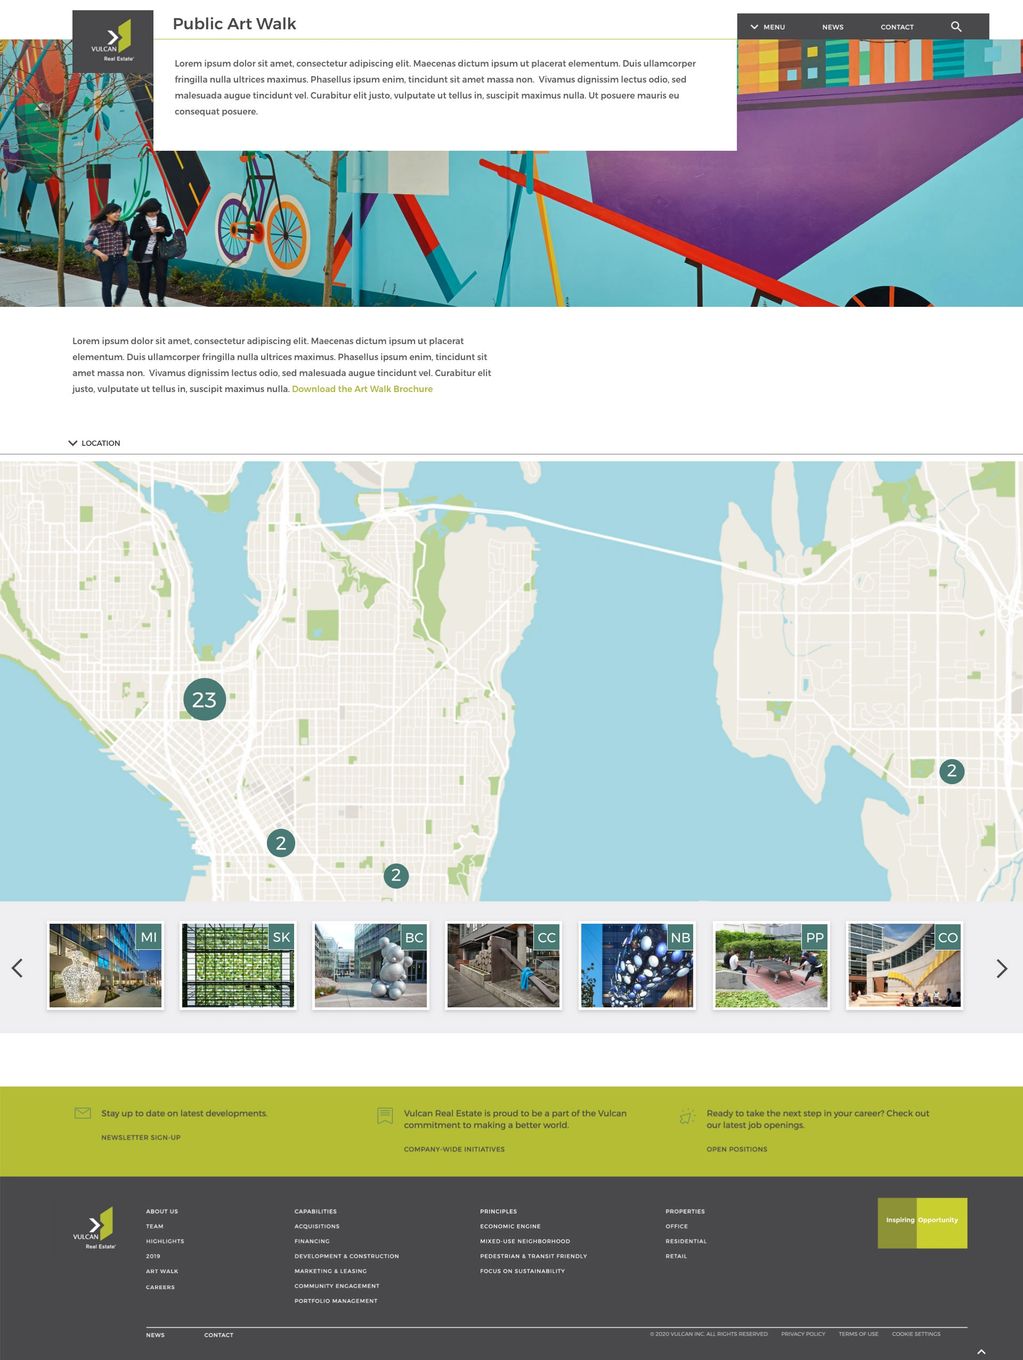 A map of Seattle and Bellevue showing Vulcan Real Estate public art installation.